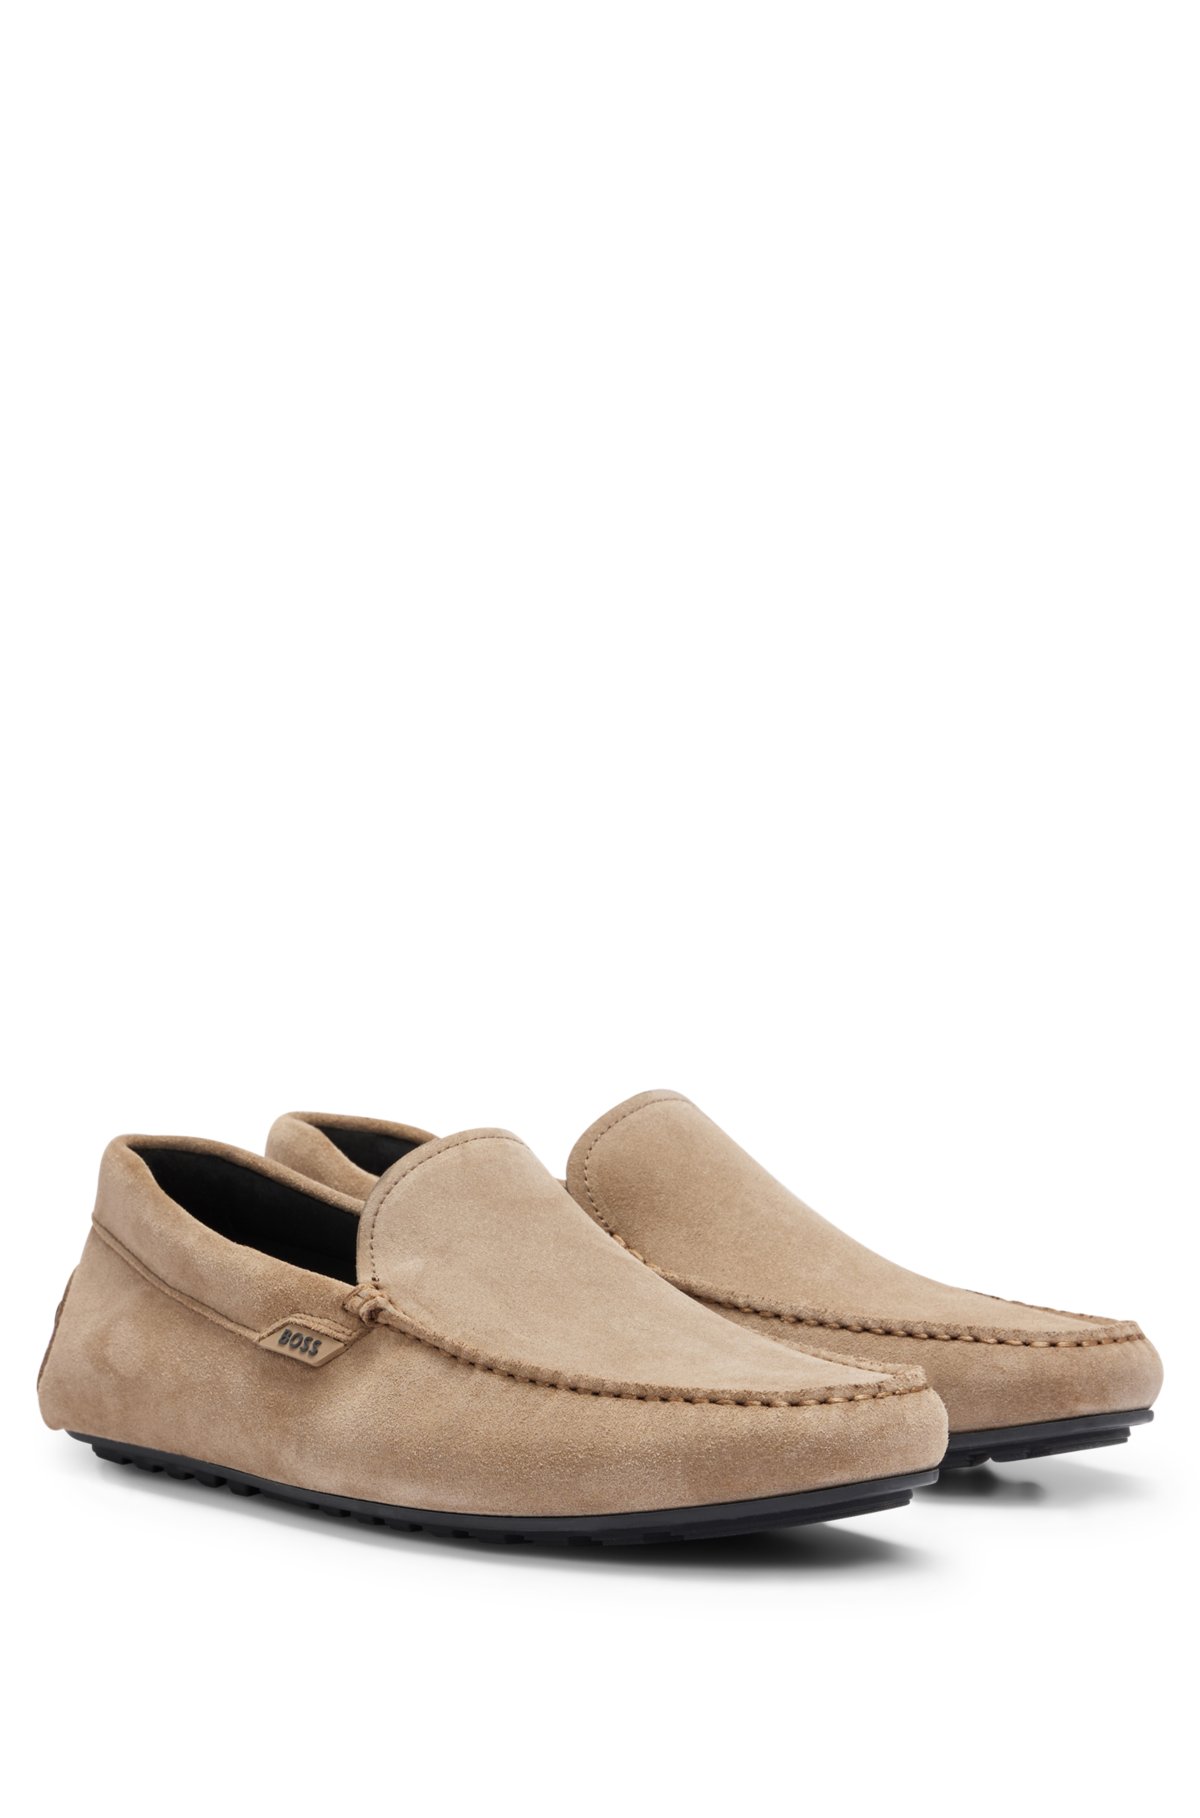 BOSS - Suede moccasins with logo details